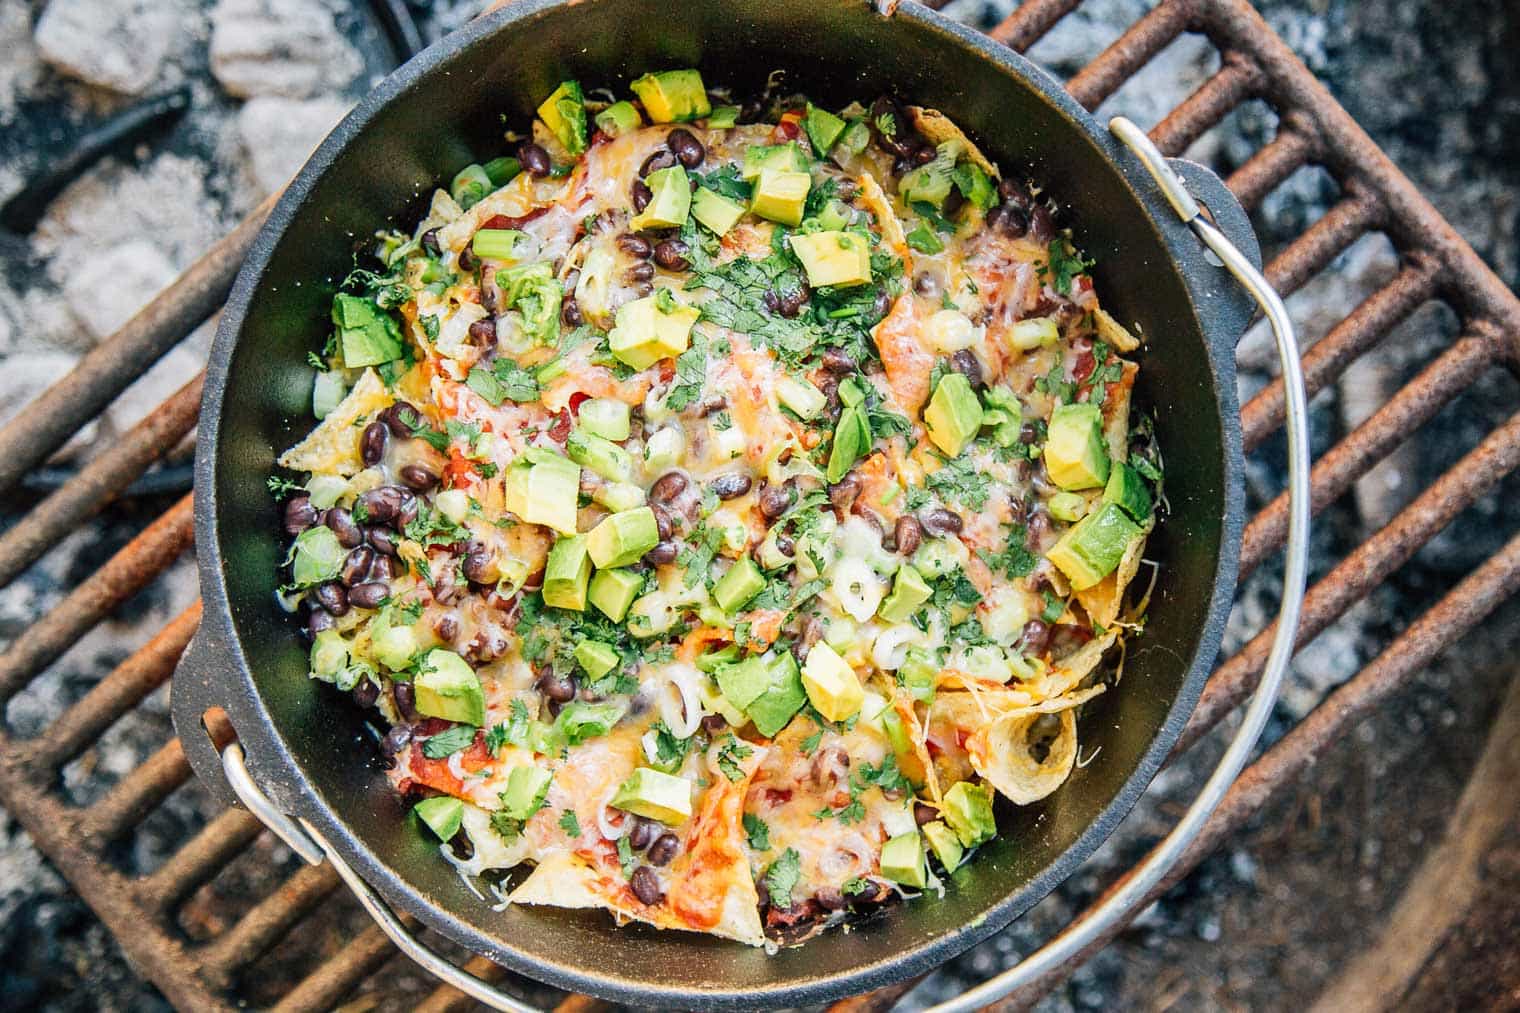 Campfire Nachos made in a Dutch oven are a simple, fast, and easy camping meal that the whole family will enjoy.